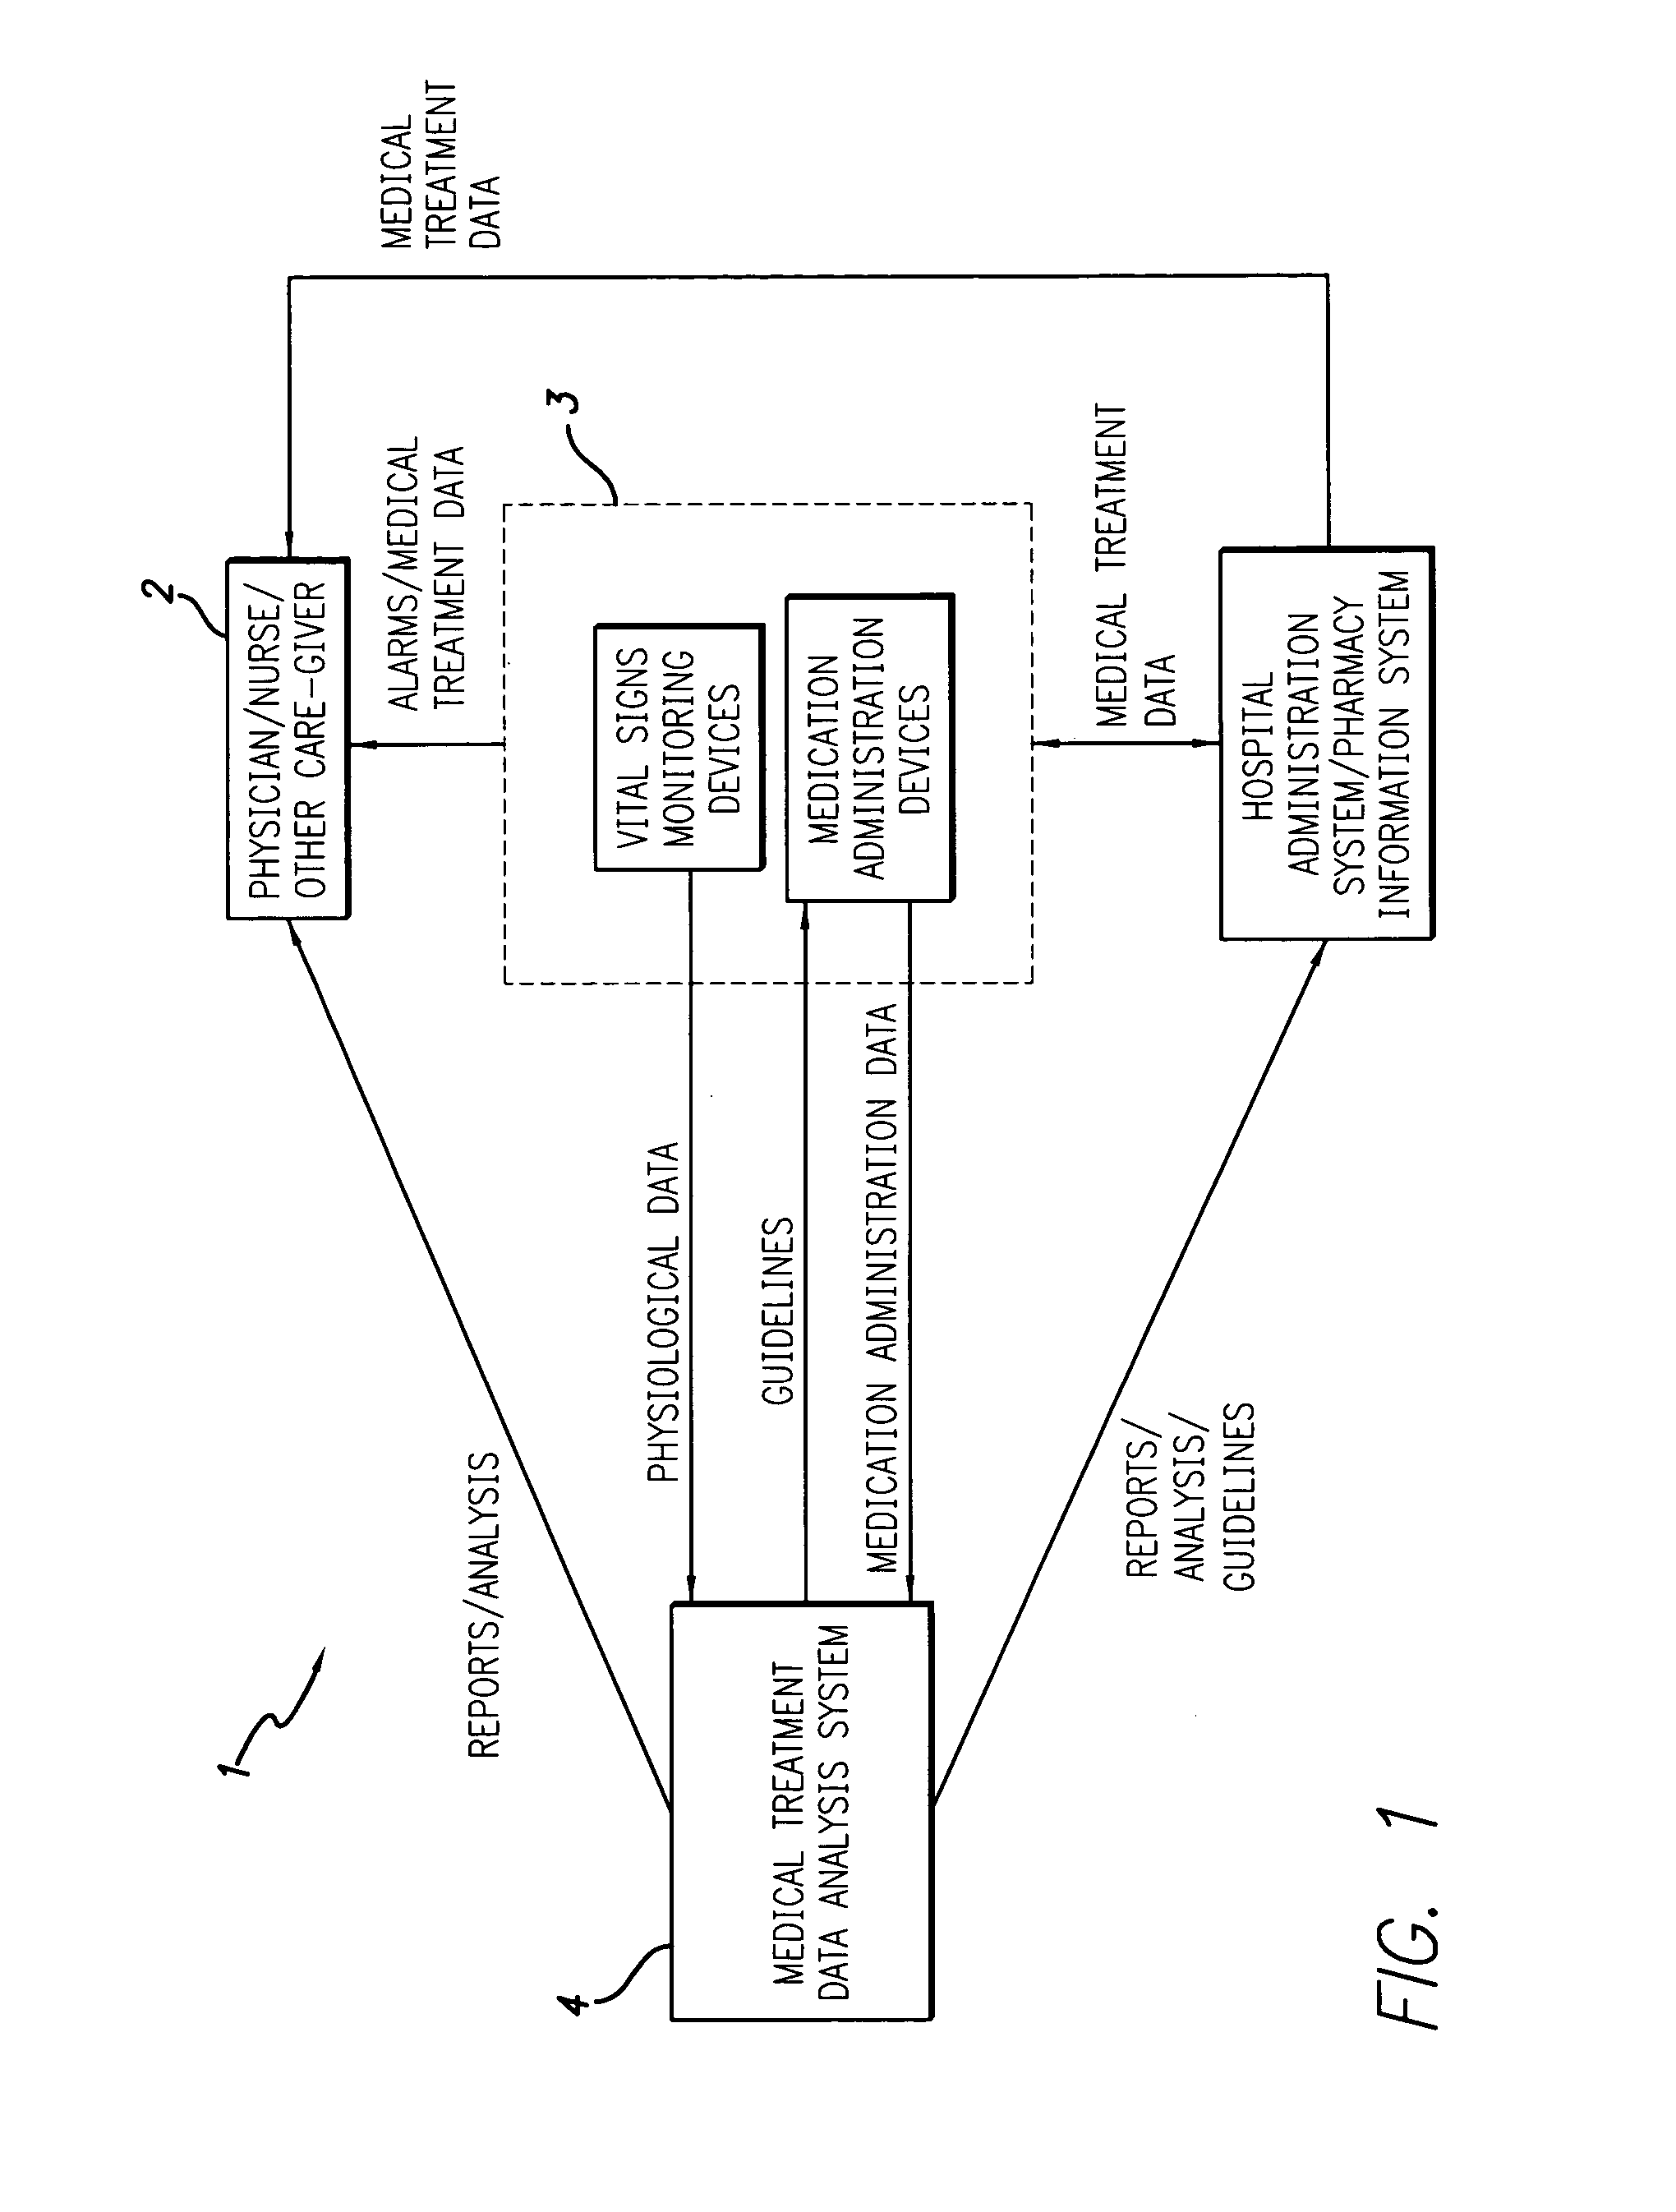 System and method for analyzing medical treatment data